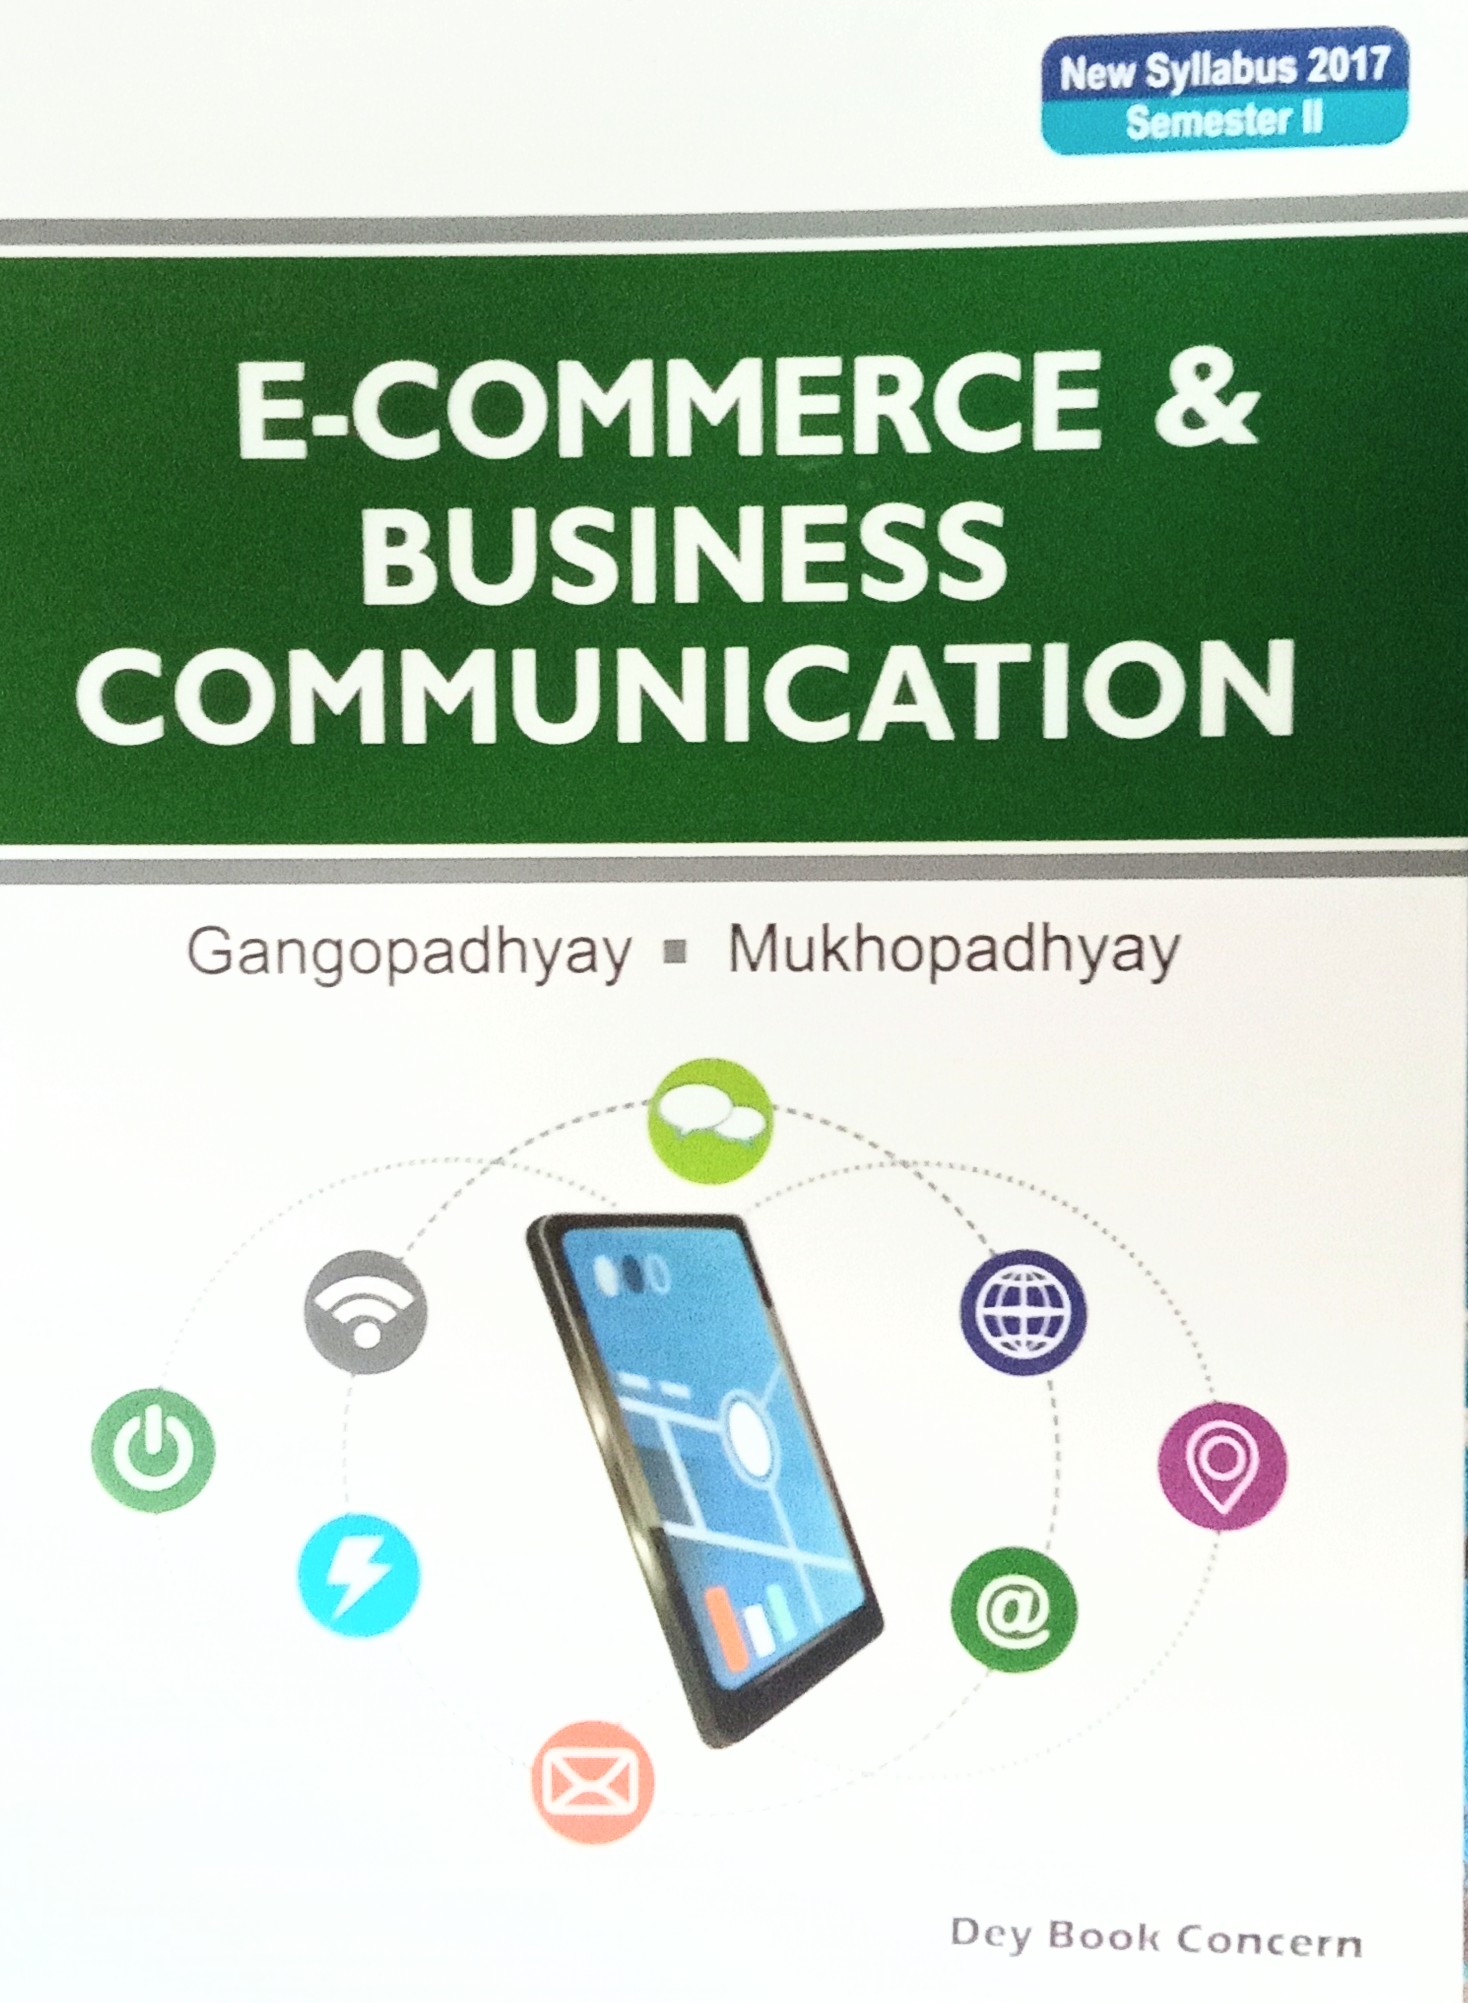 E COMMERCE And BUSINESS COMMUNICATION BY Gangopadhyay And Mukhopadhyay